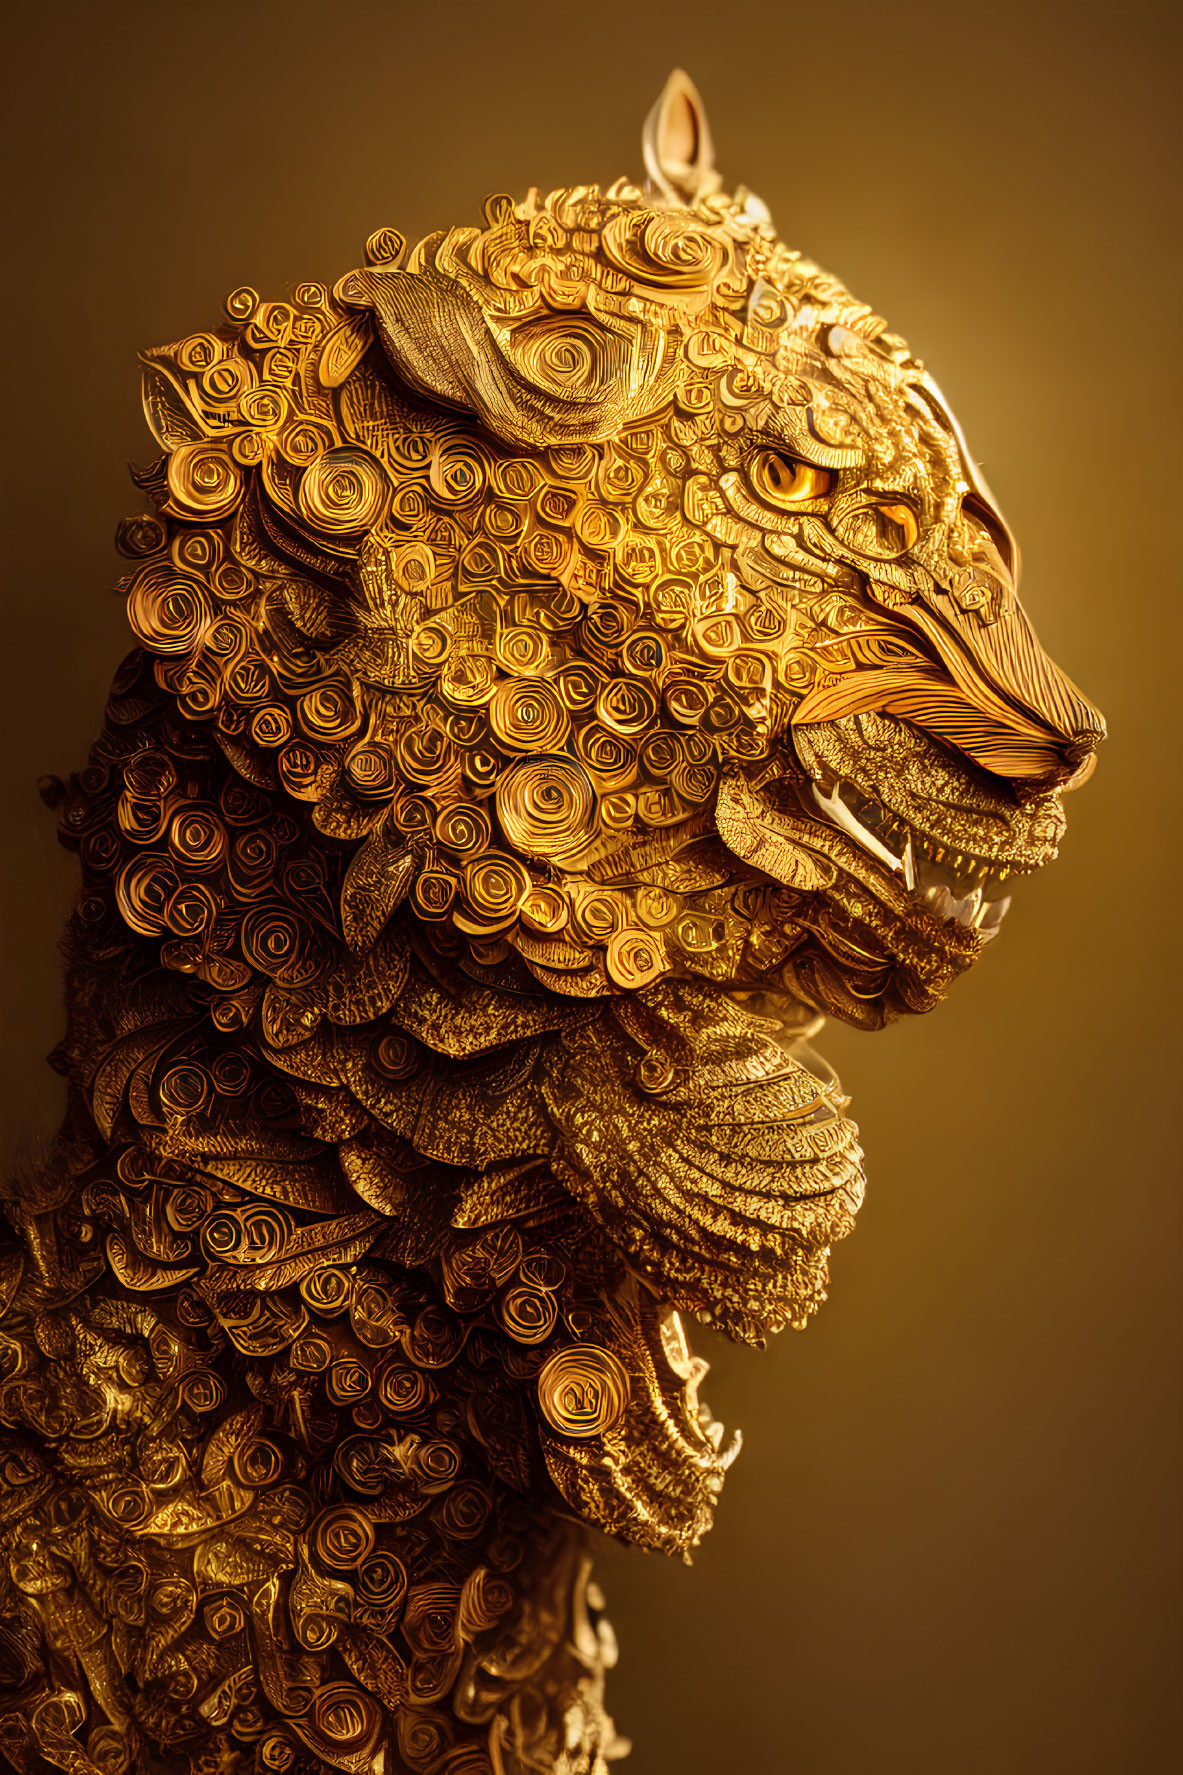 Intricate Golden Lion Head Sculpture with Swirls and Floral Patterns